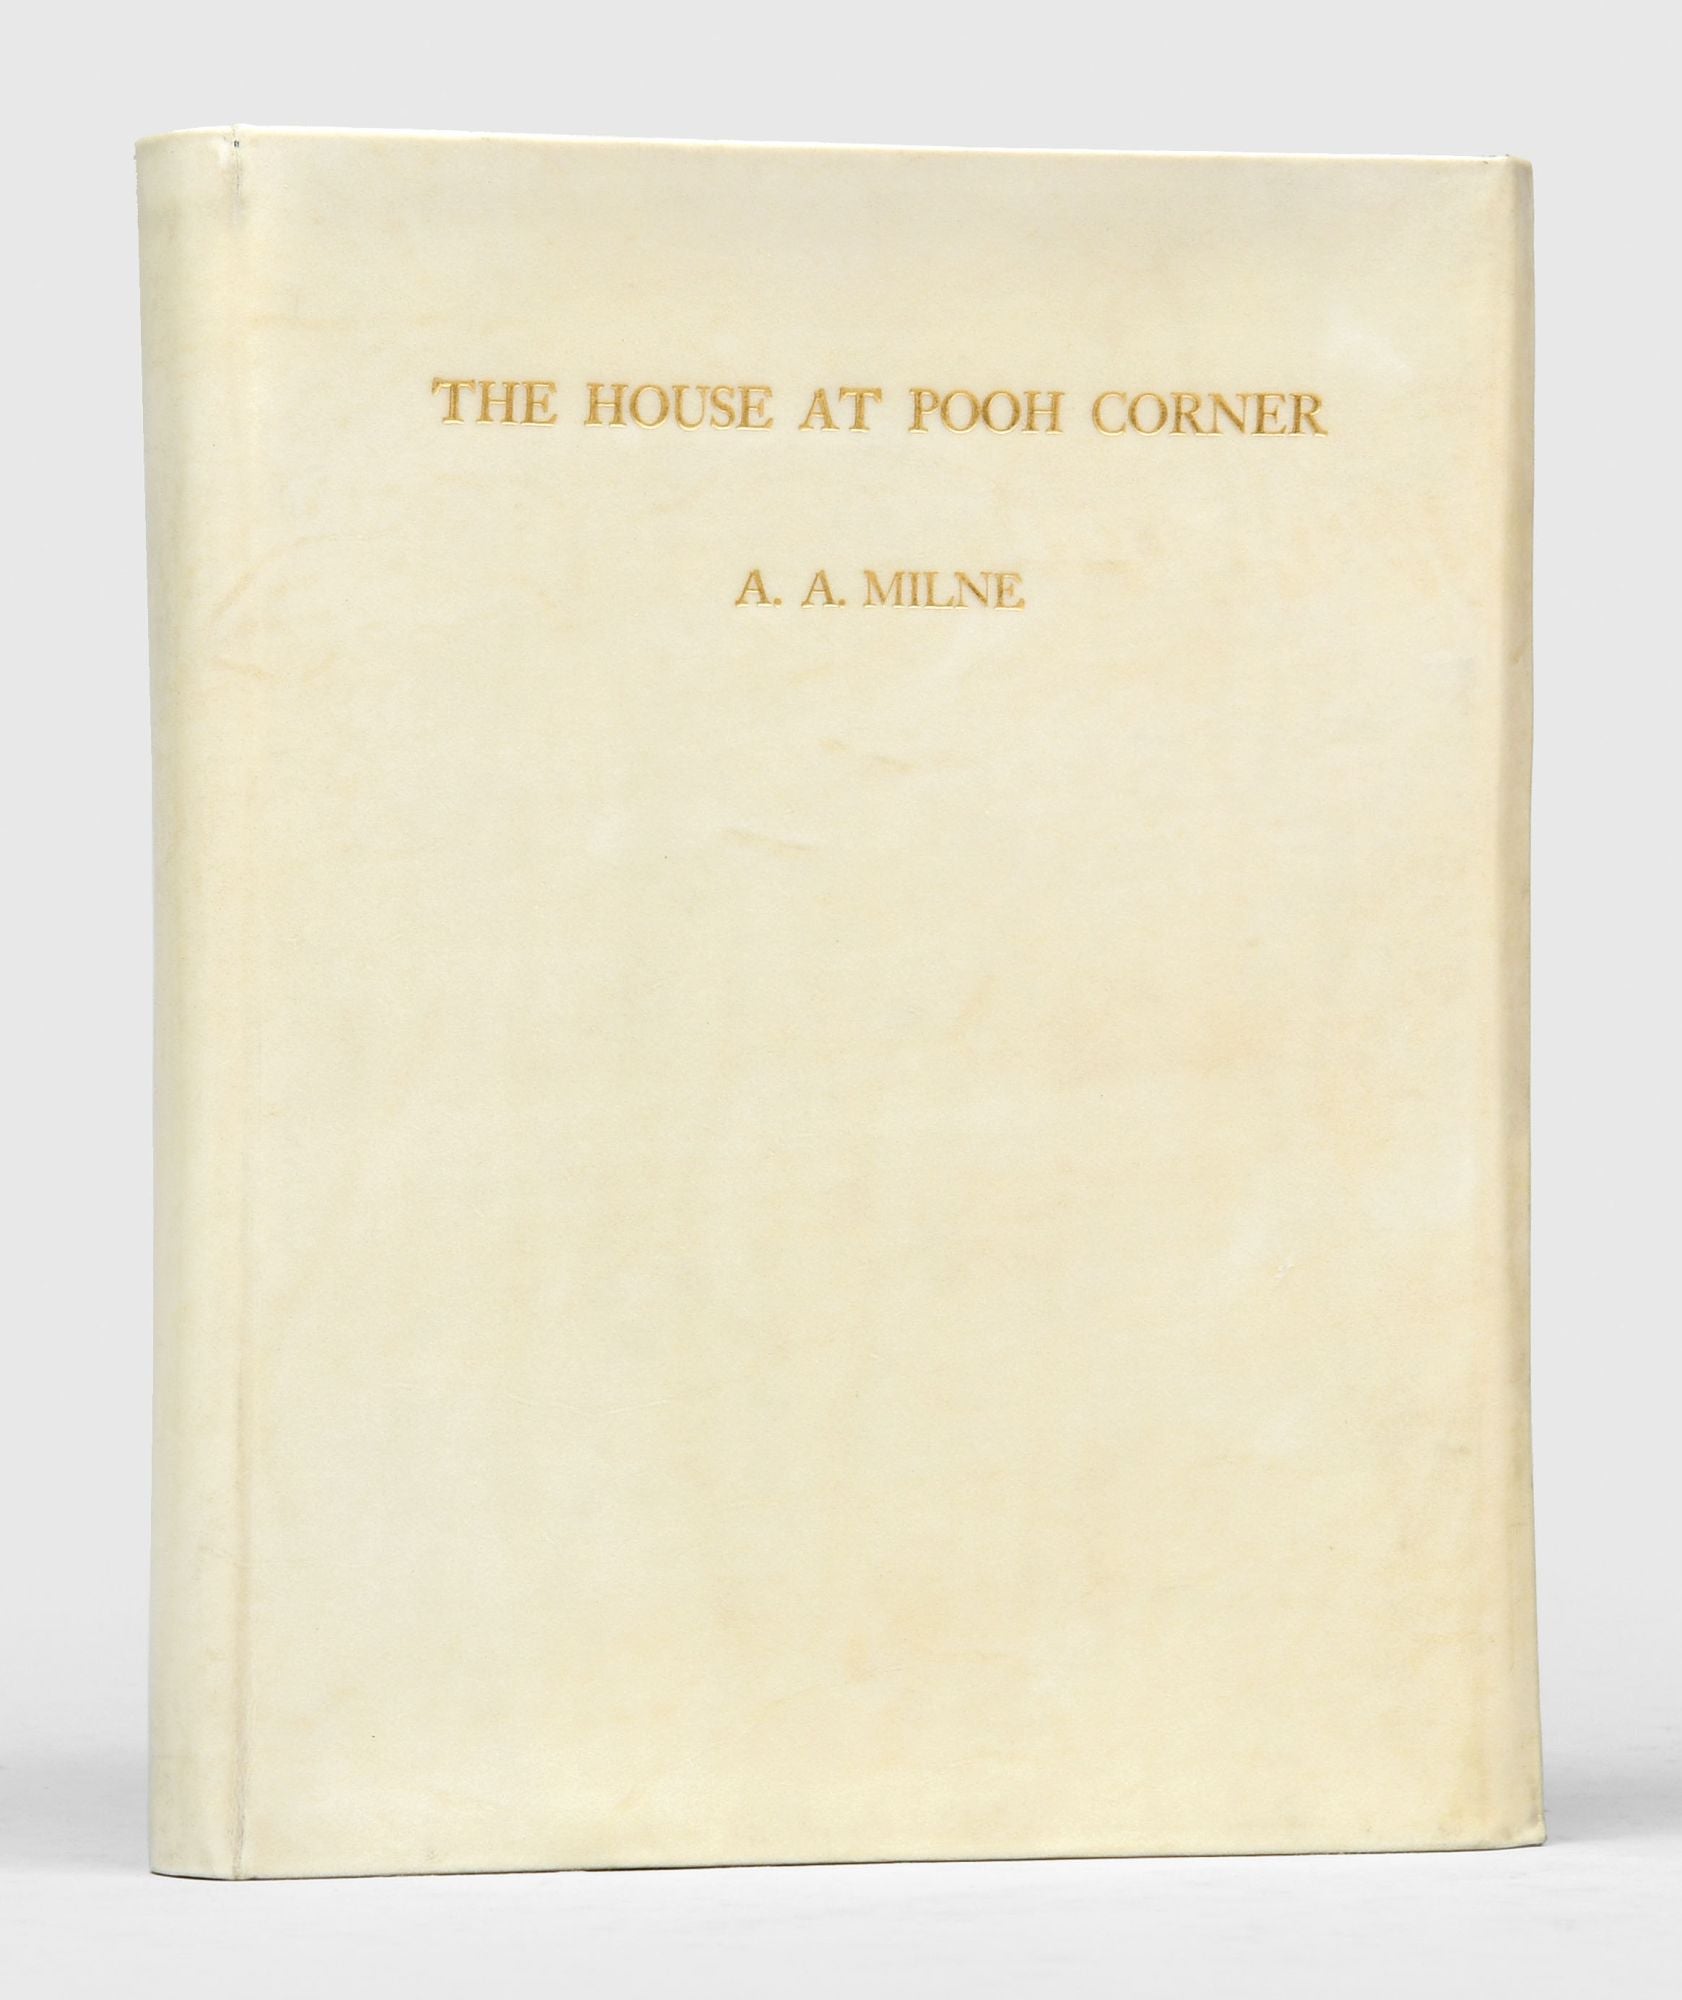 (Item #5186) The House at Pooh Corner (Signed limited edition). A. A. Milne, A. E. Shepherd.